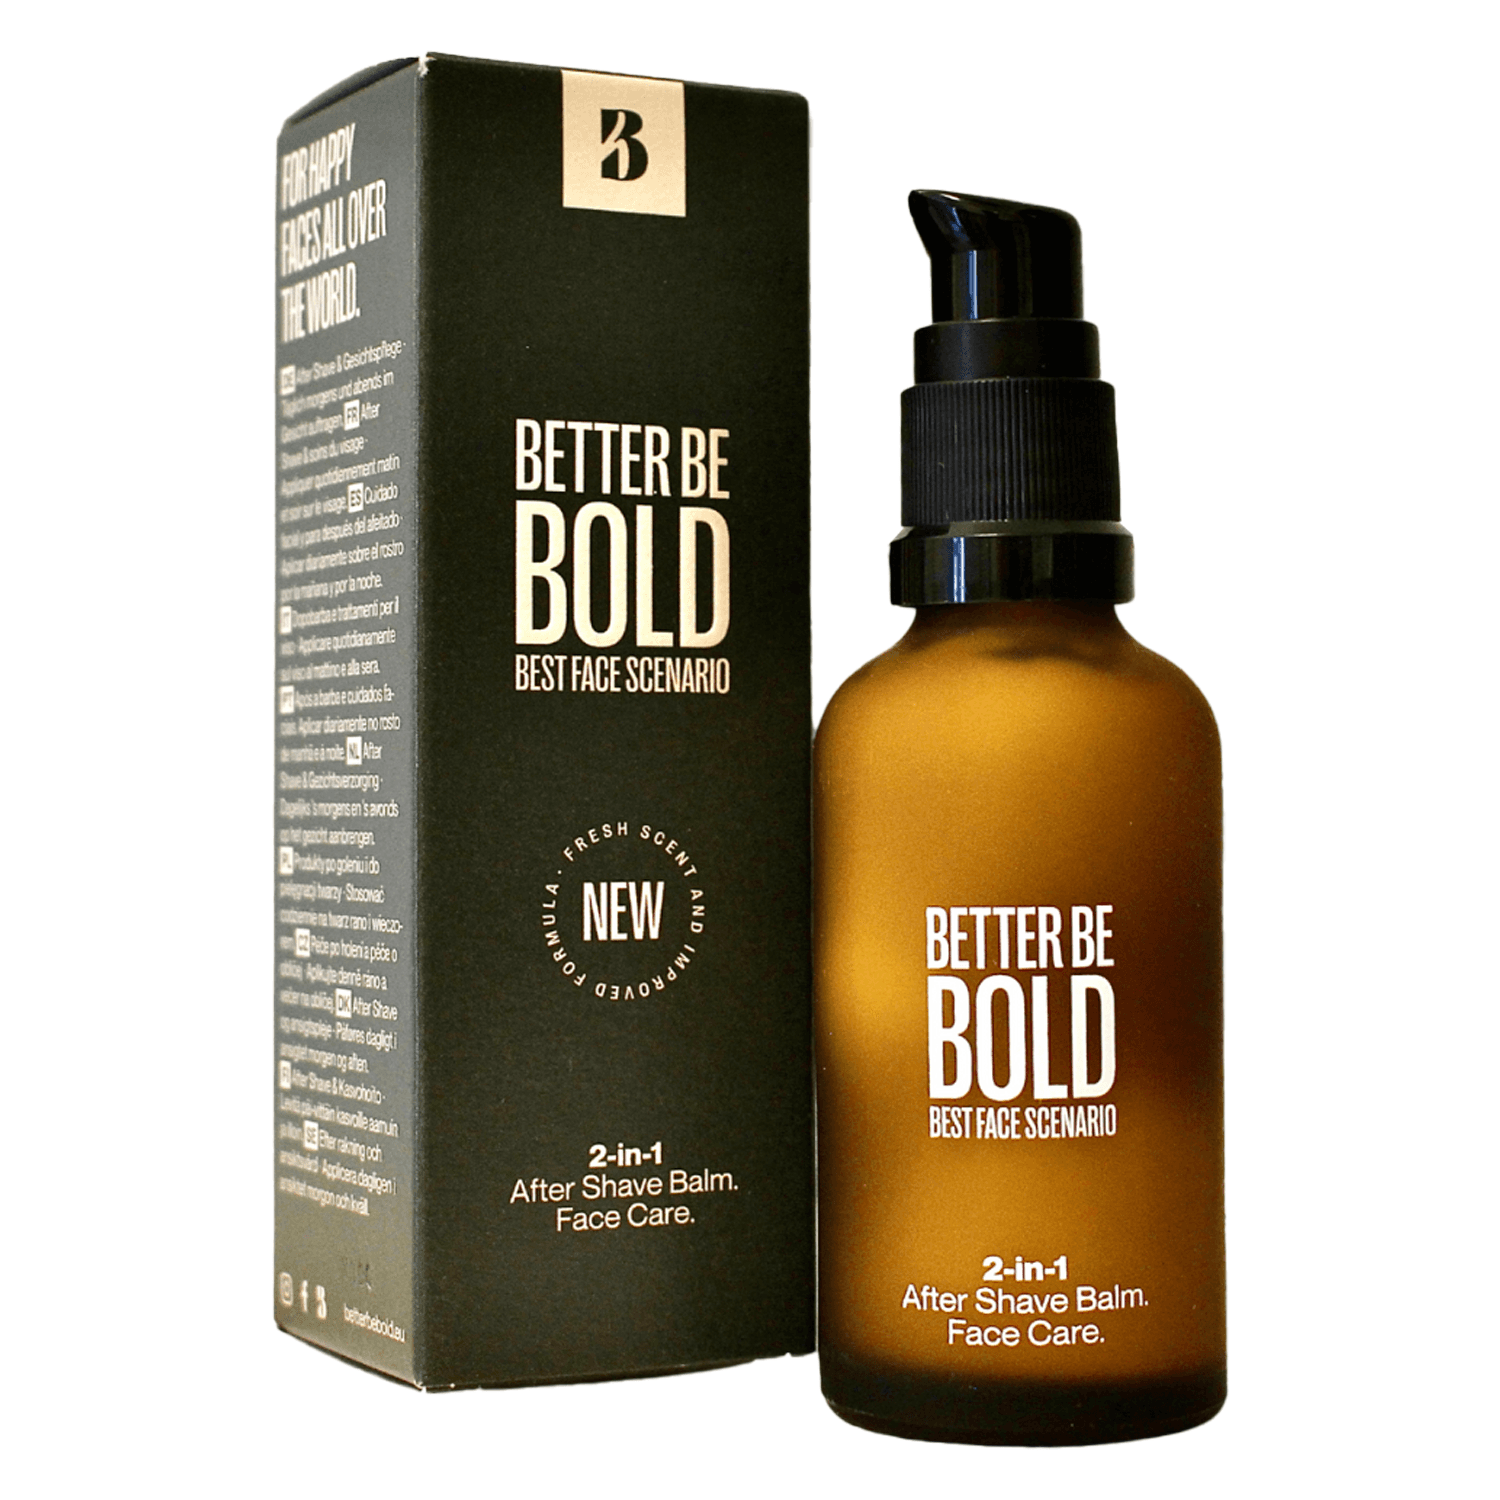 BETTER BE BOLD - 2-in-1 After Shave Balm & Face Cream